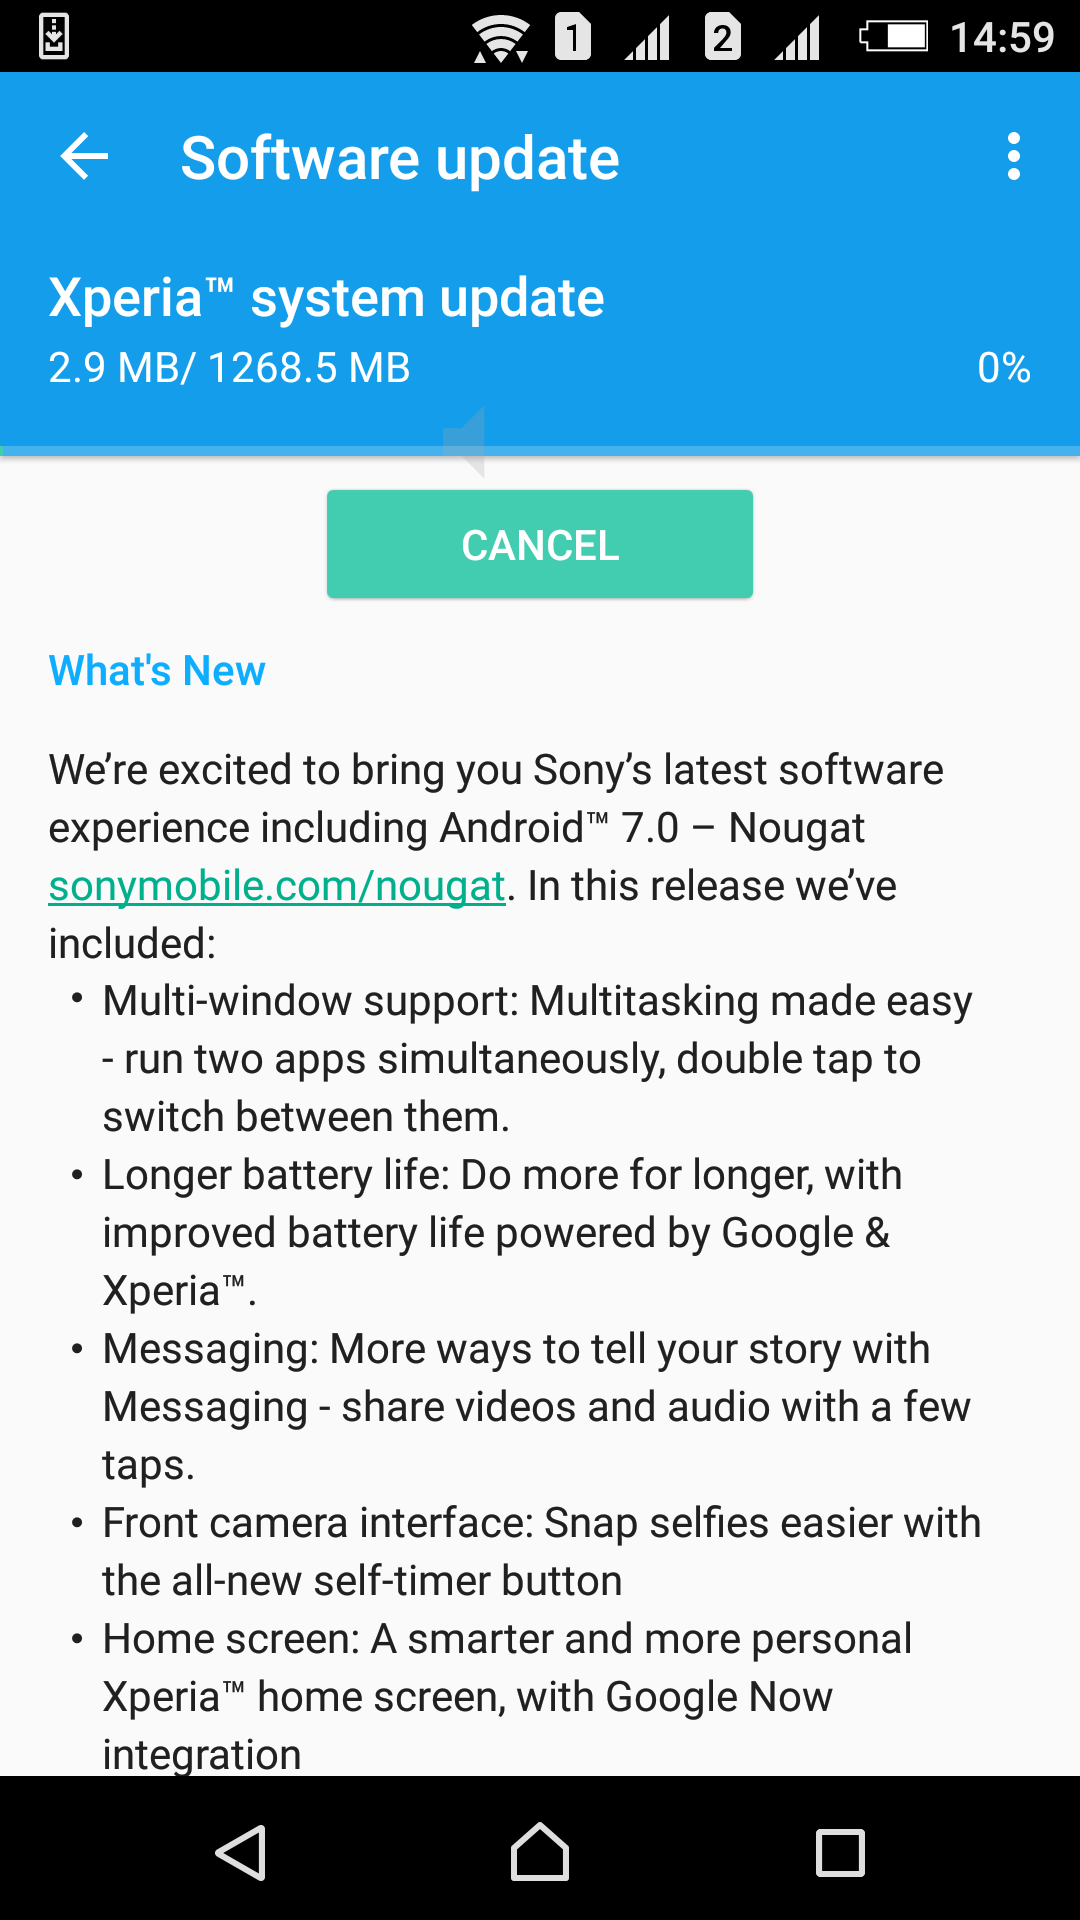 Xperia Z5 Android 7.0 Nougat